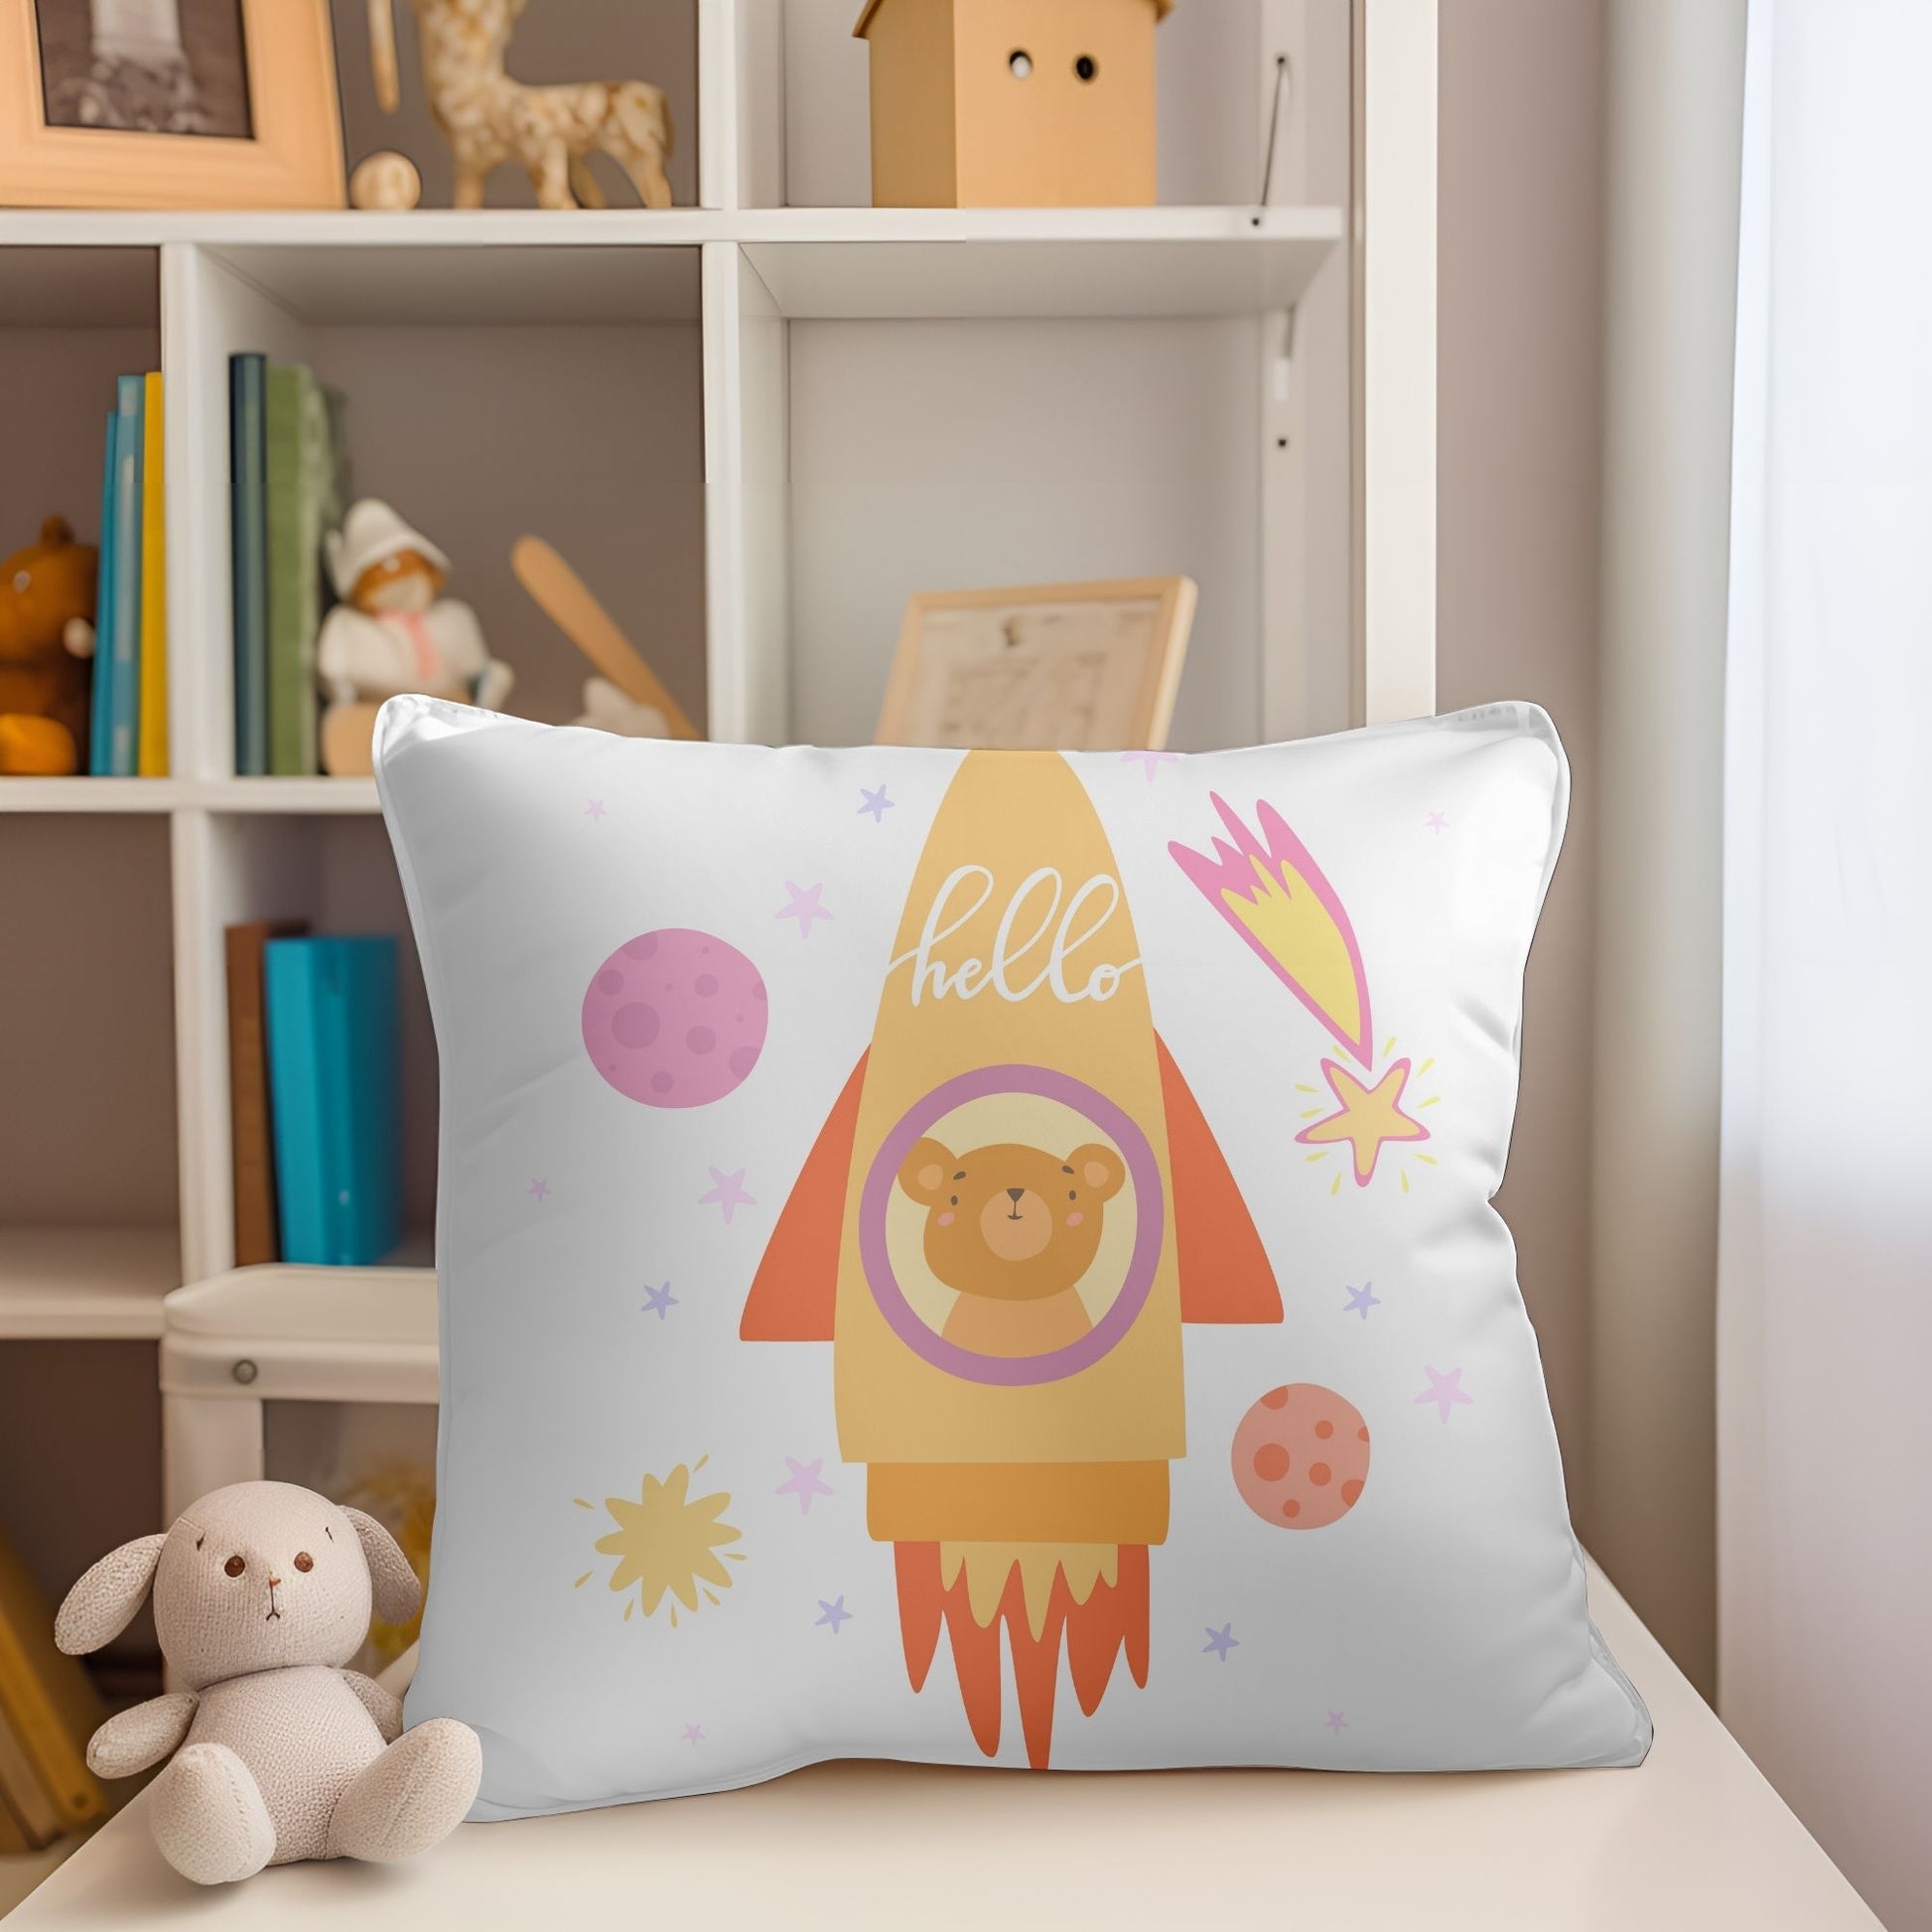 Cozy rocket-shaped baby pillow adorned with an adorable bear illustration.